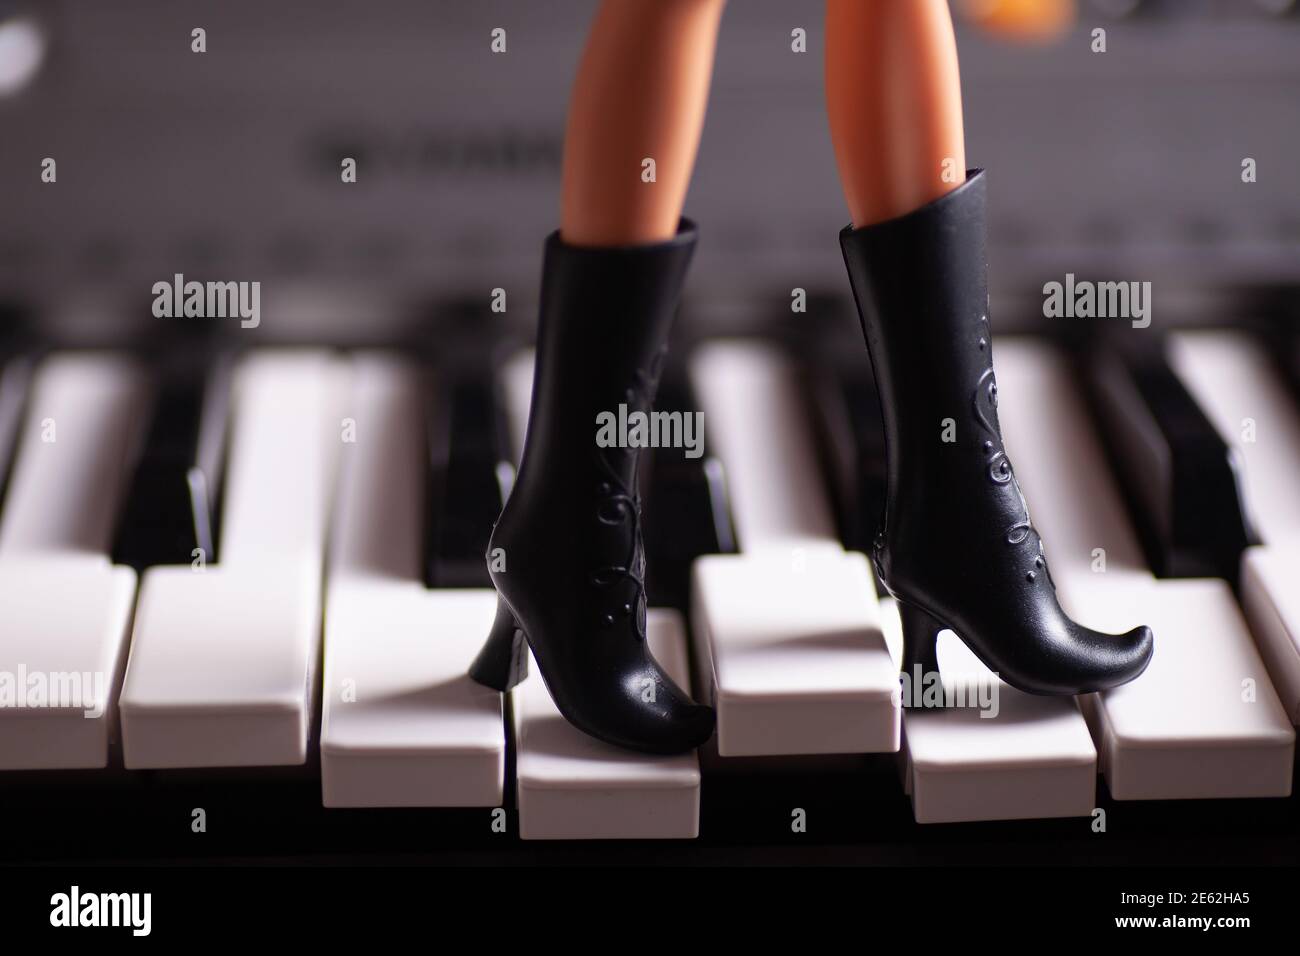 Close-up slim plastic legs in black toy rubber boots with high heels step on piano keys Stock Photo